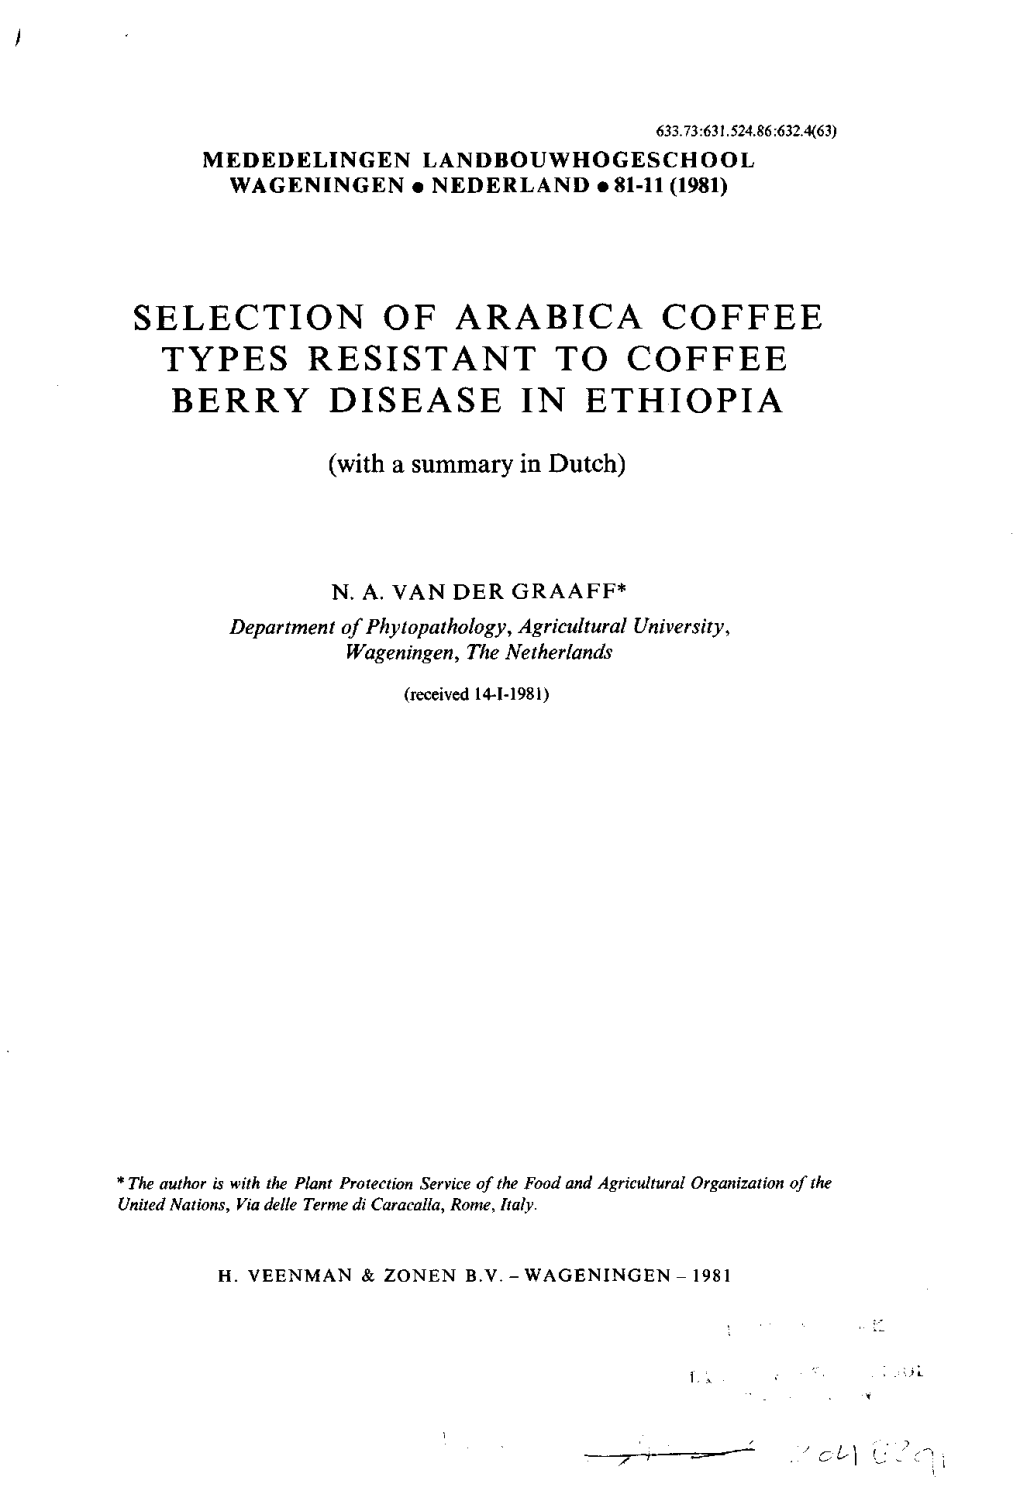 Selection of Arabica Coffee Types Resistant to Coffee Berry Disease in Ethiopia